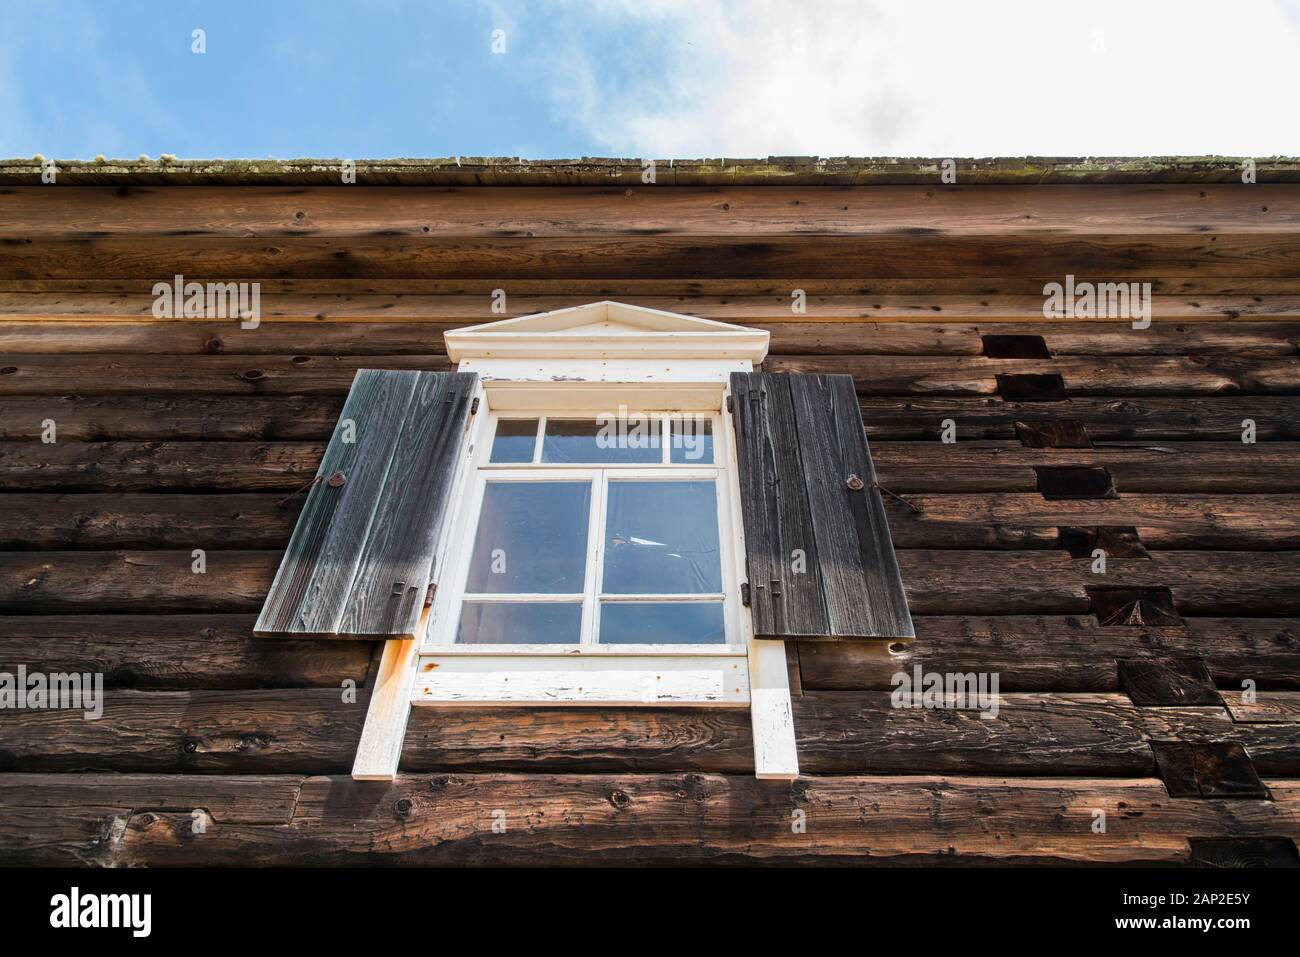 Building details of wooden hand built structures at Fort Ross State Historic Park on the Sonoma County coast of California Stock Photo